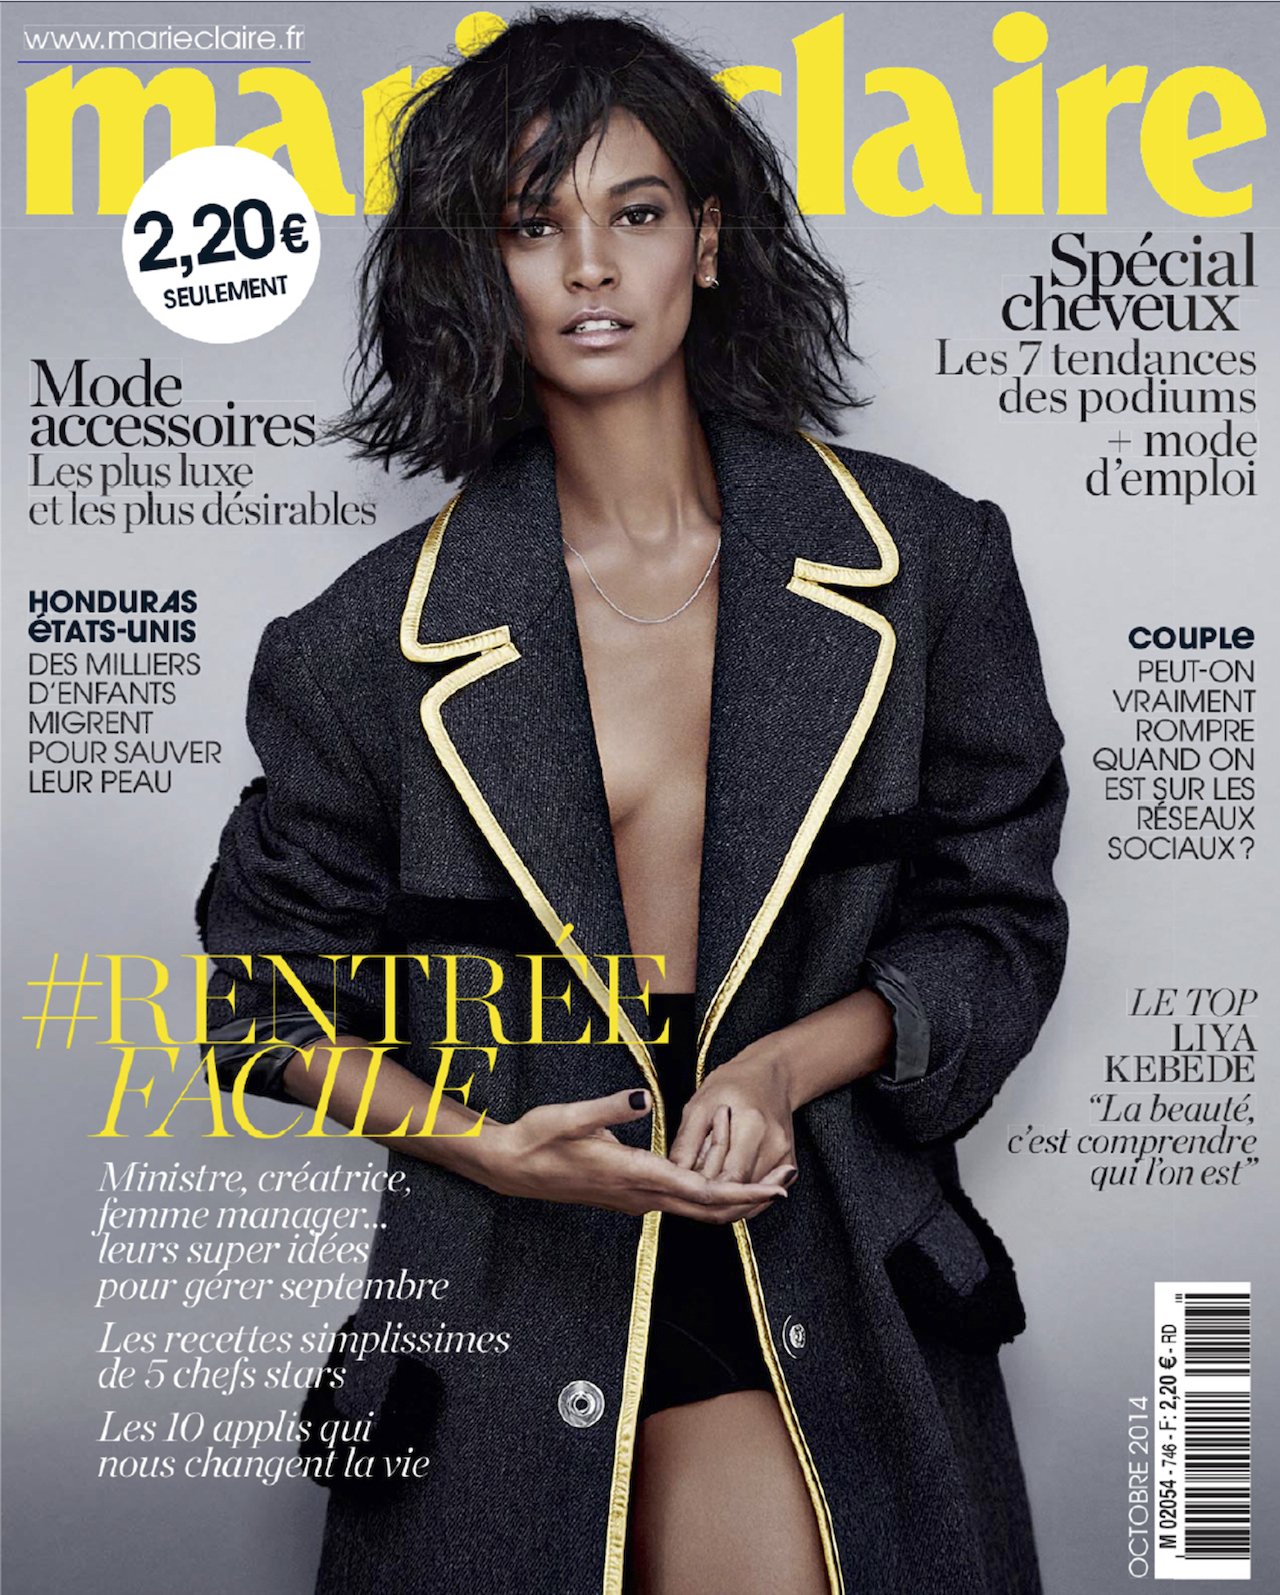 Liya-Kebede-by-Tziano-Magni-for-Marie-Claire-France-00002.jpeg